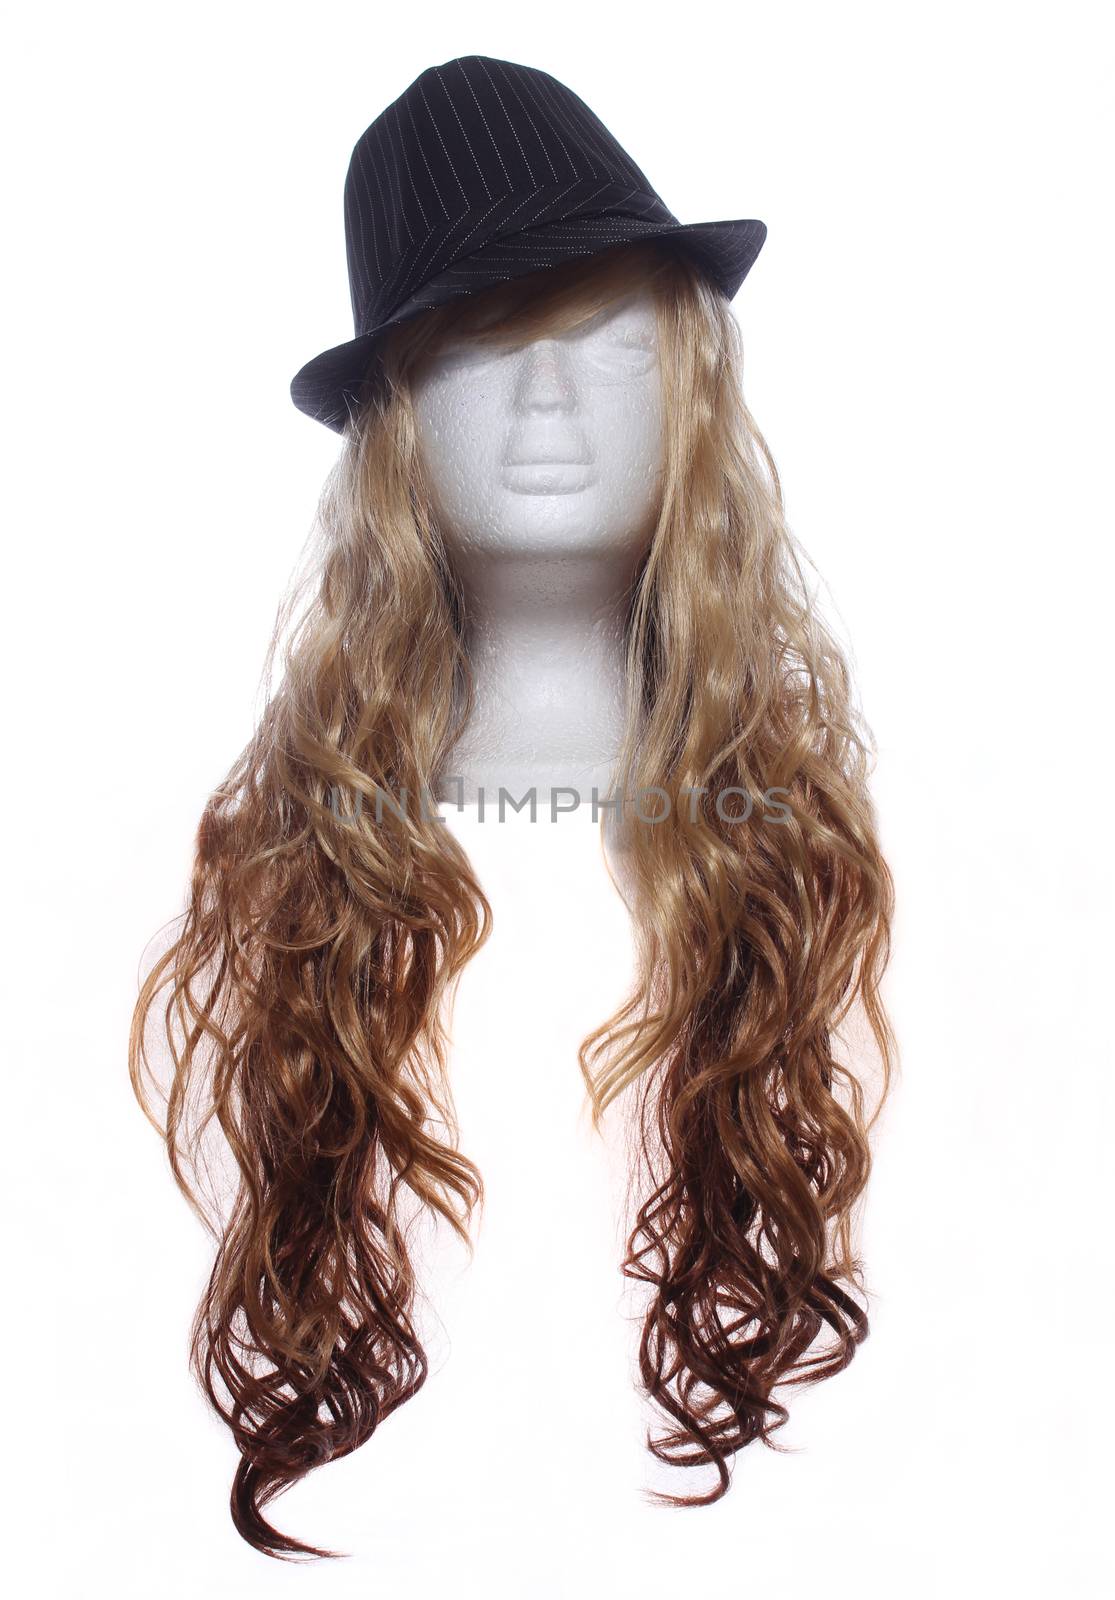 Classic Fedora Hat on Mannequin With Honey Blond Wig by Marti157900